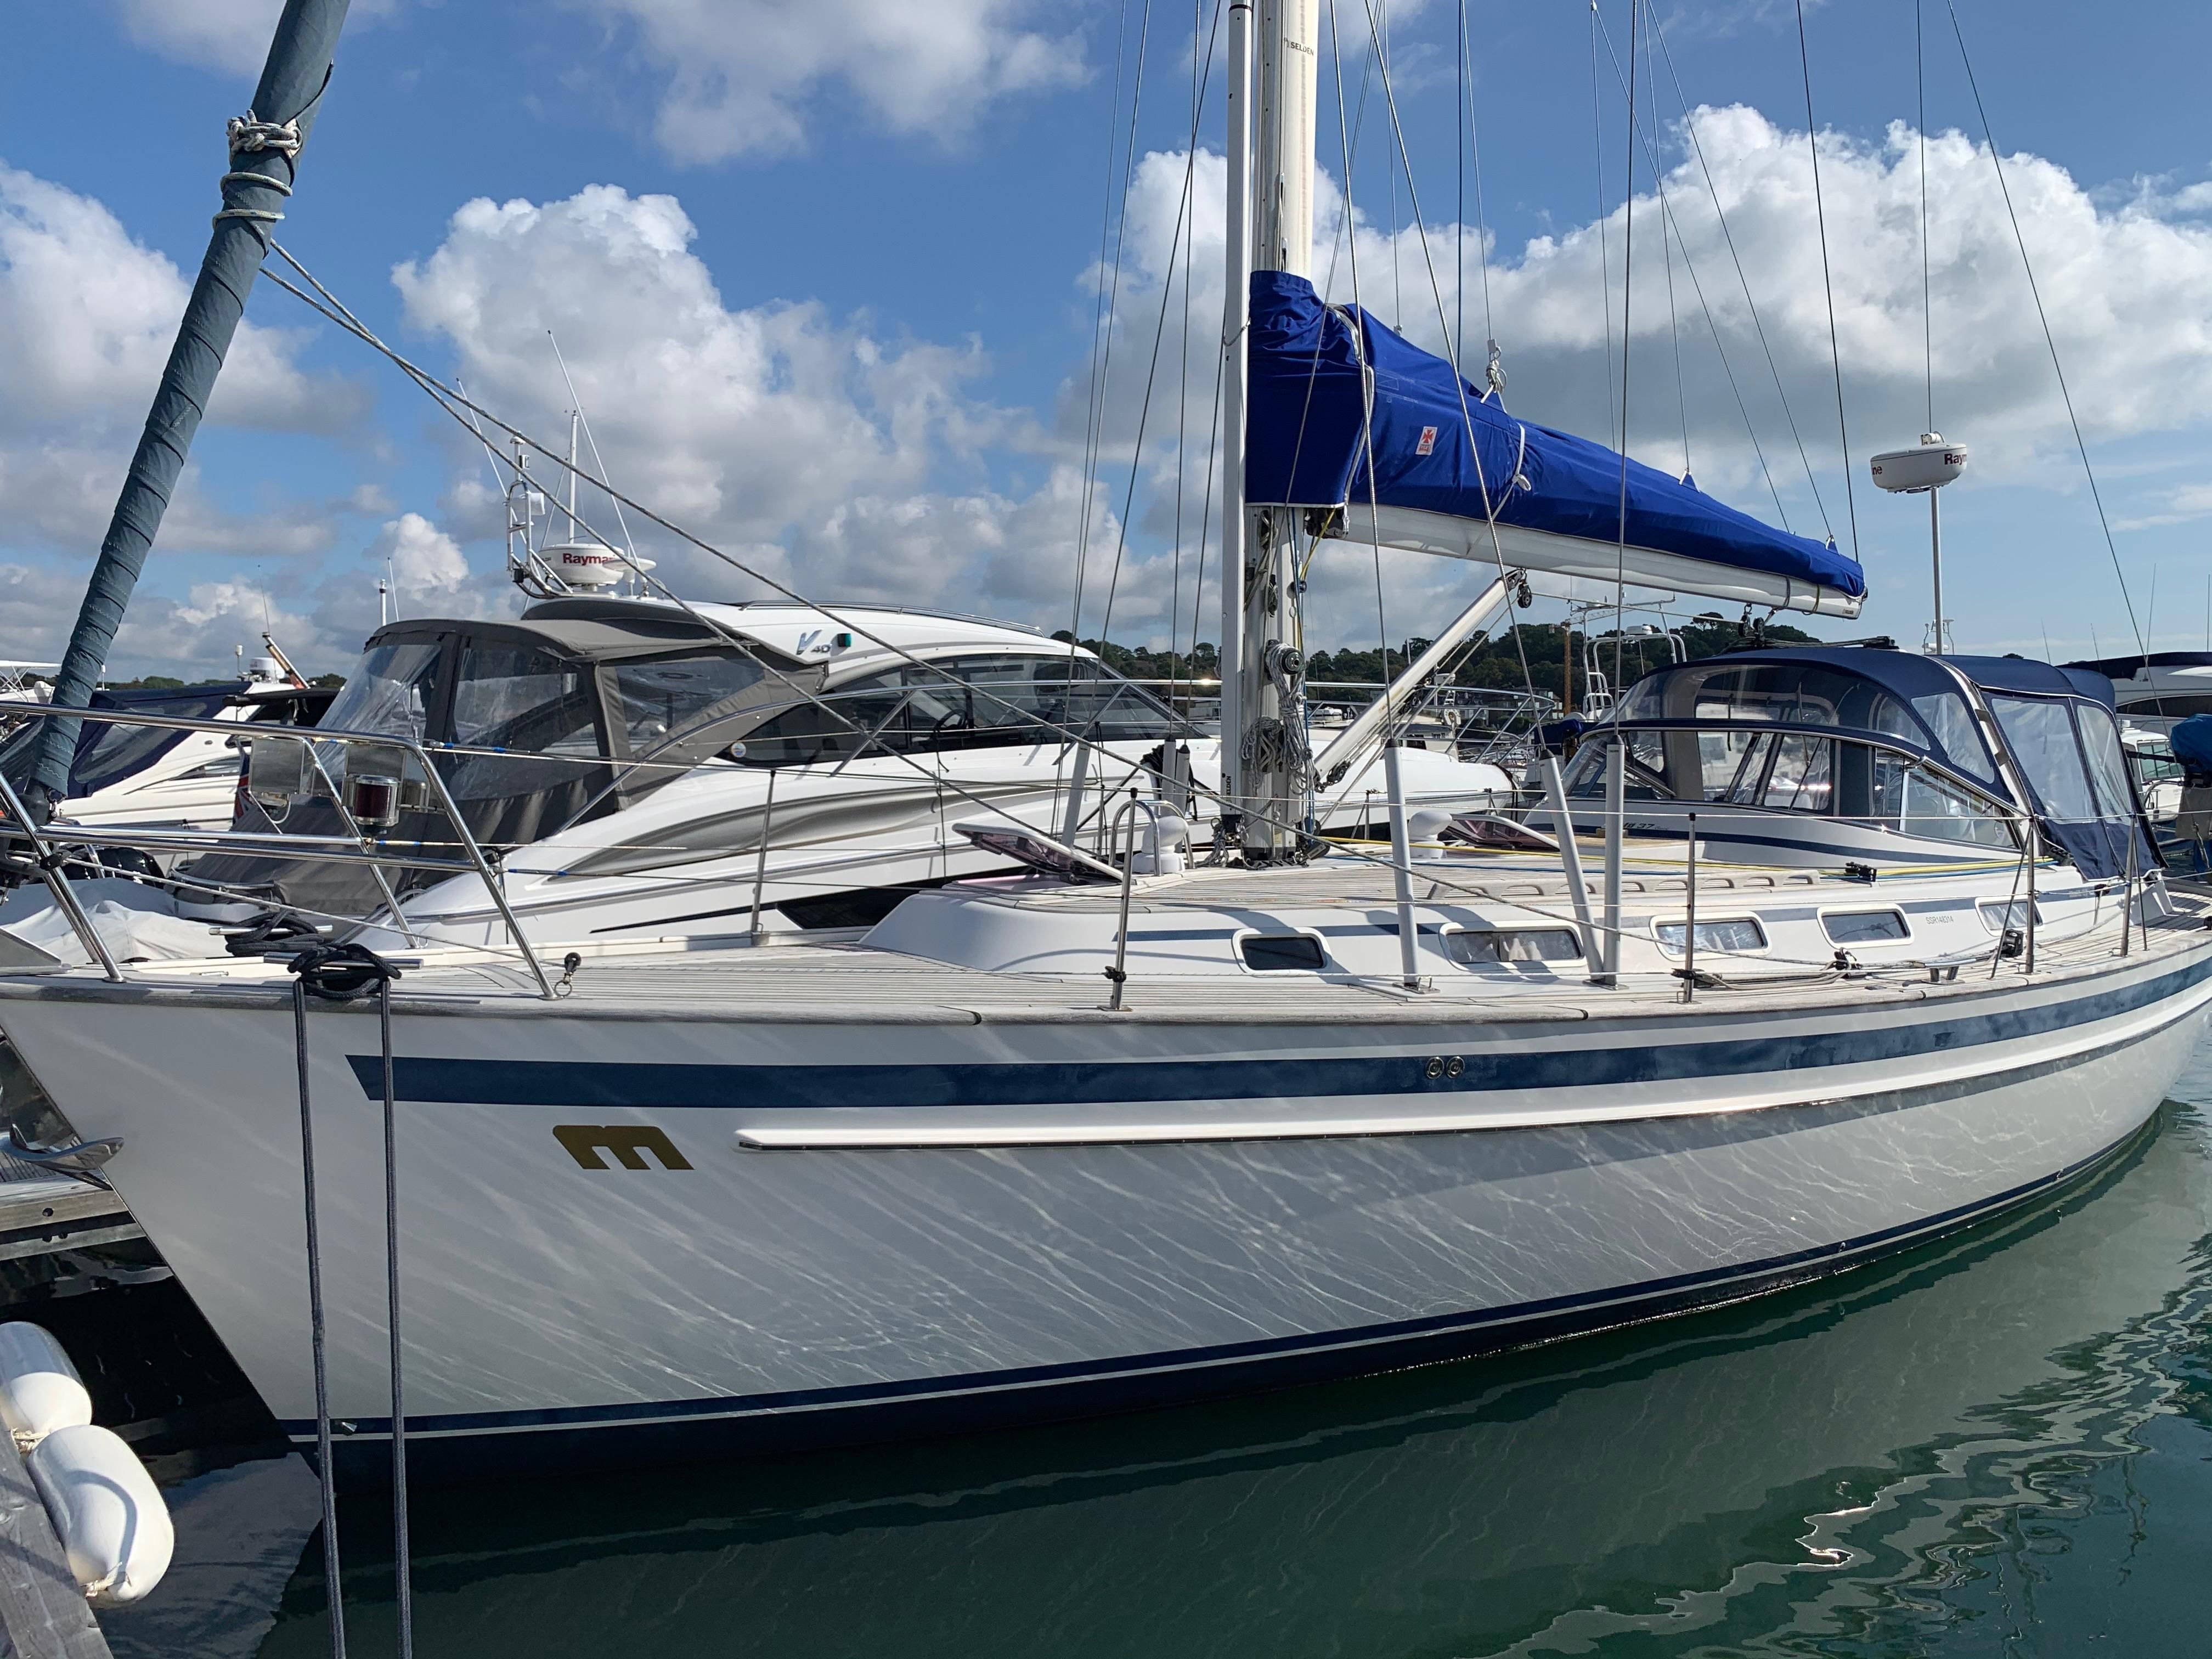 malo yachts for sale uk